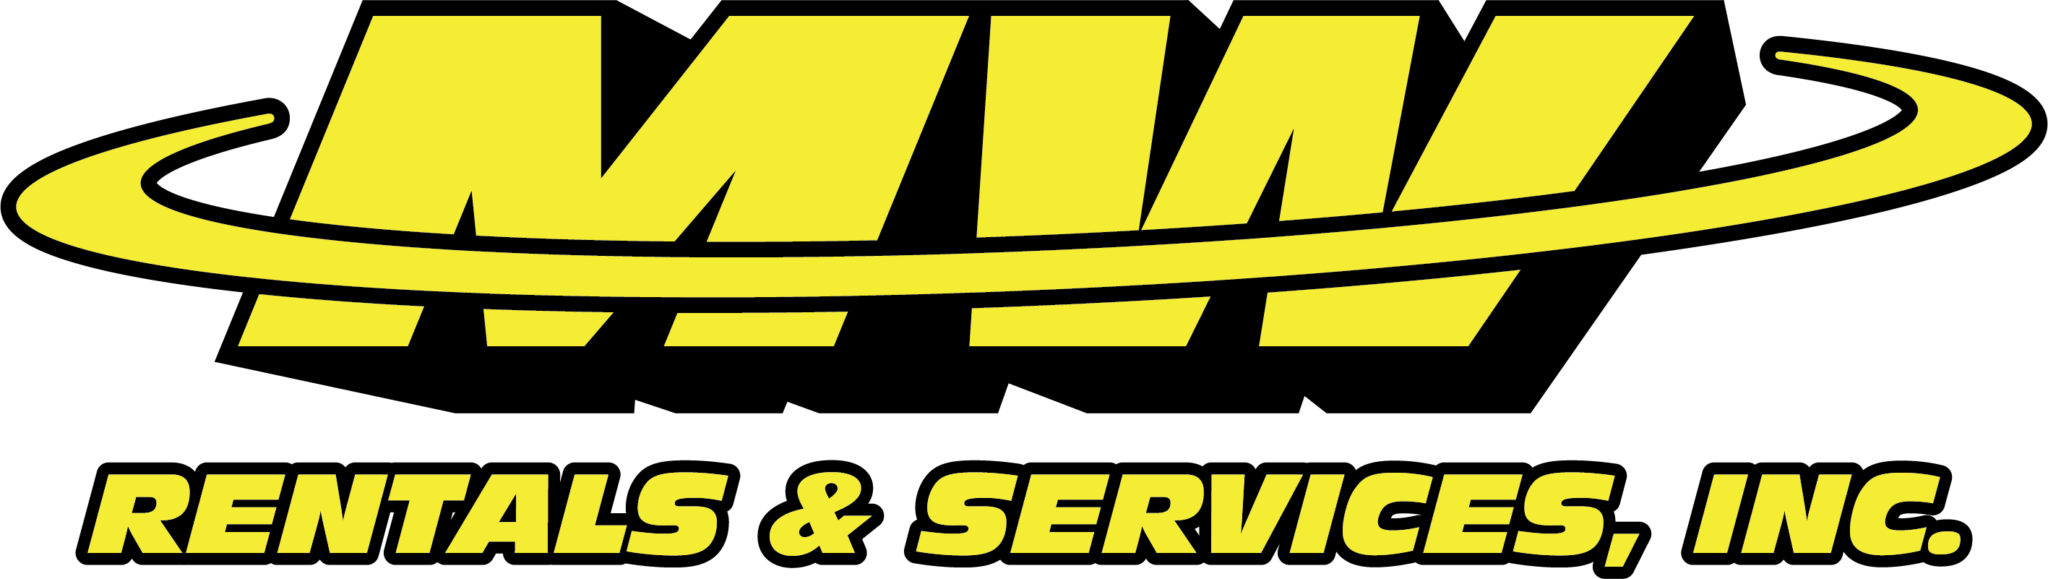 Yellow and black M.W. Rentals logo - Industrial and commercial equipment rentals